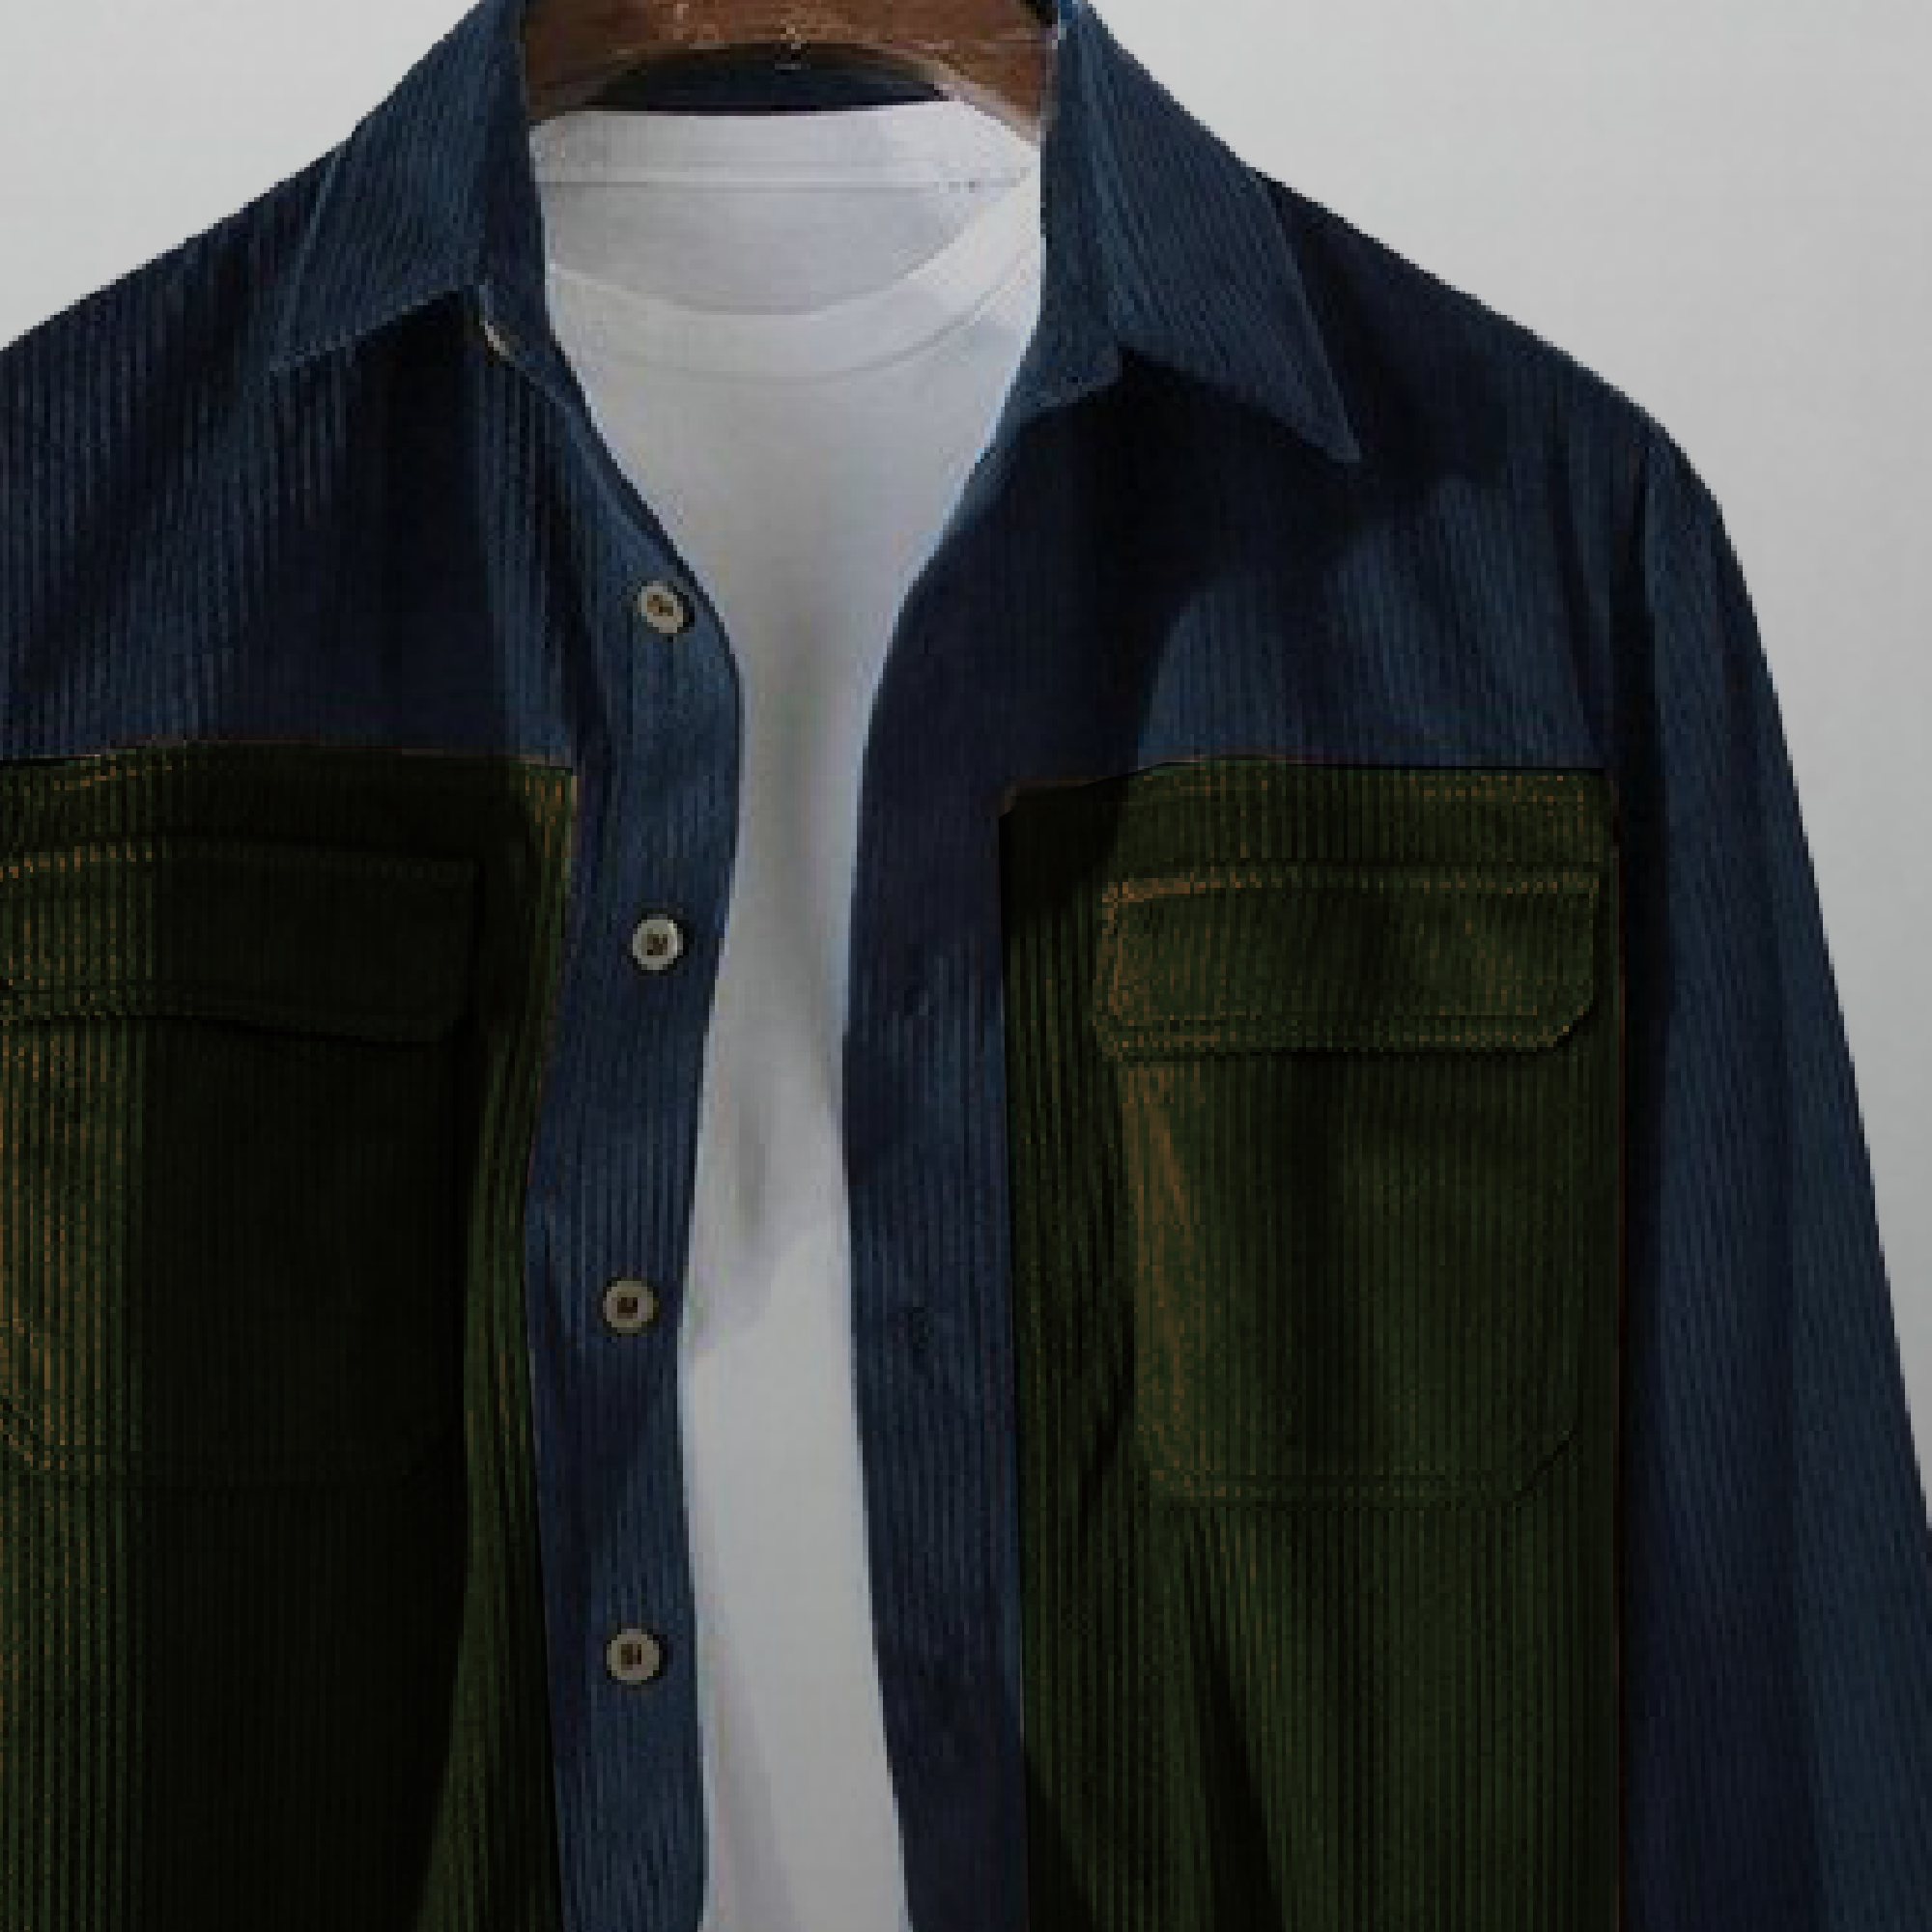 Men's Solid Blue Corduroy oversized shirt with Patch Pockets and A Plain white T-shirt-RMS028